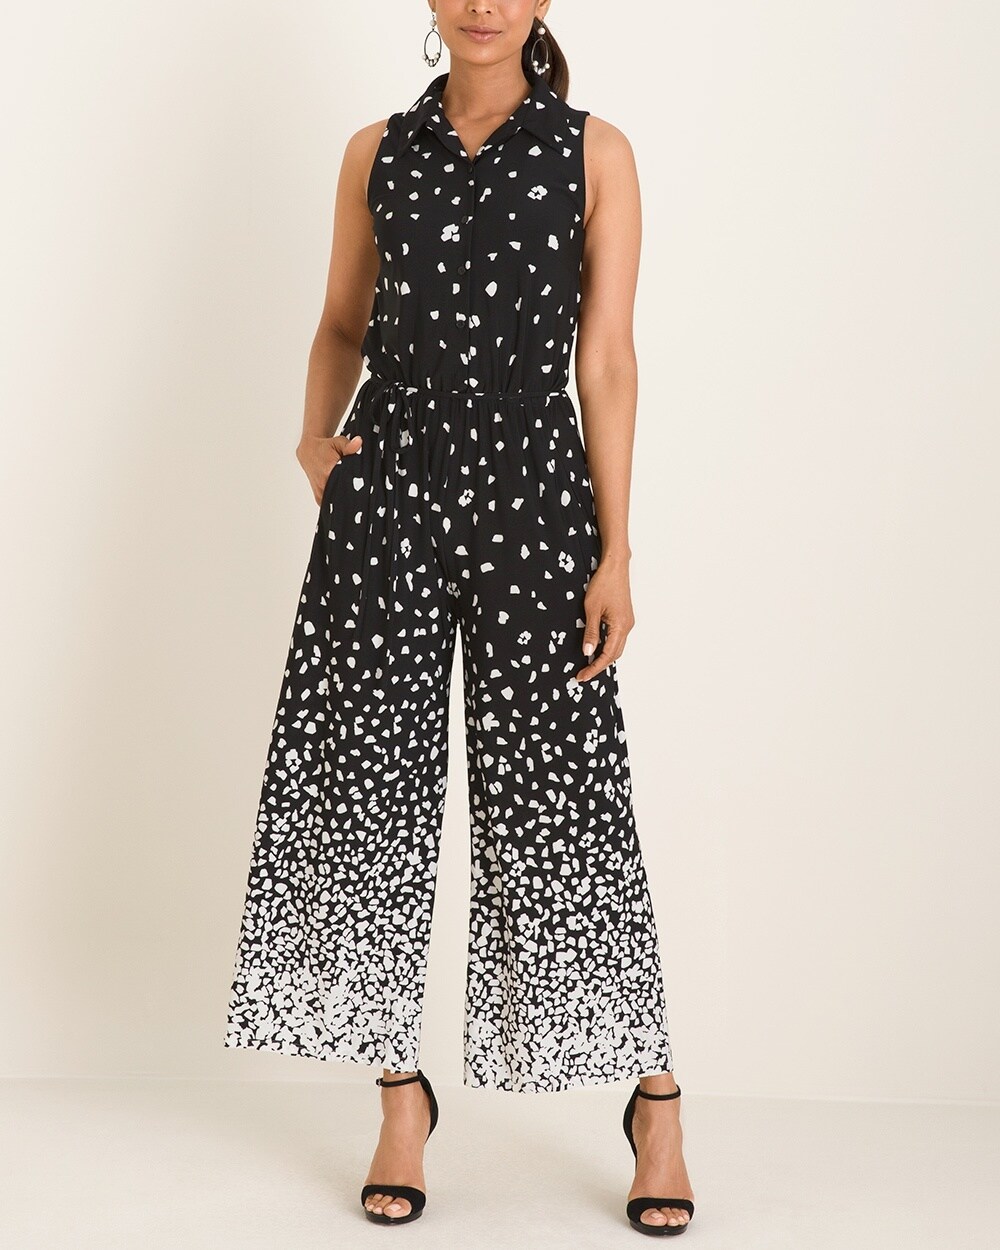 Maggy London Black and White Printed Jumpsuit